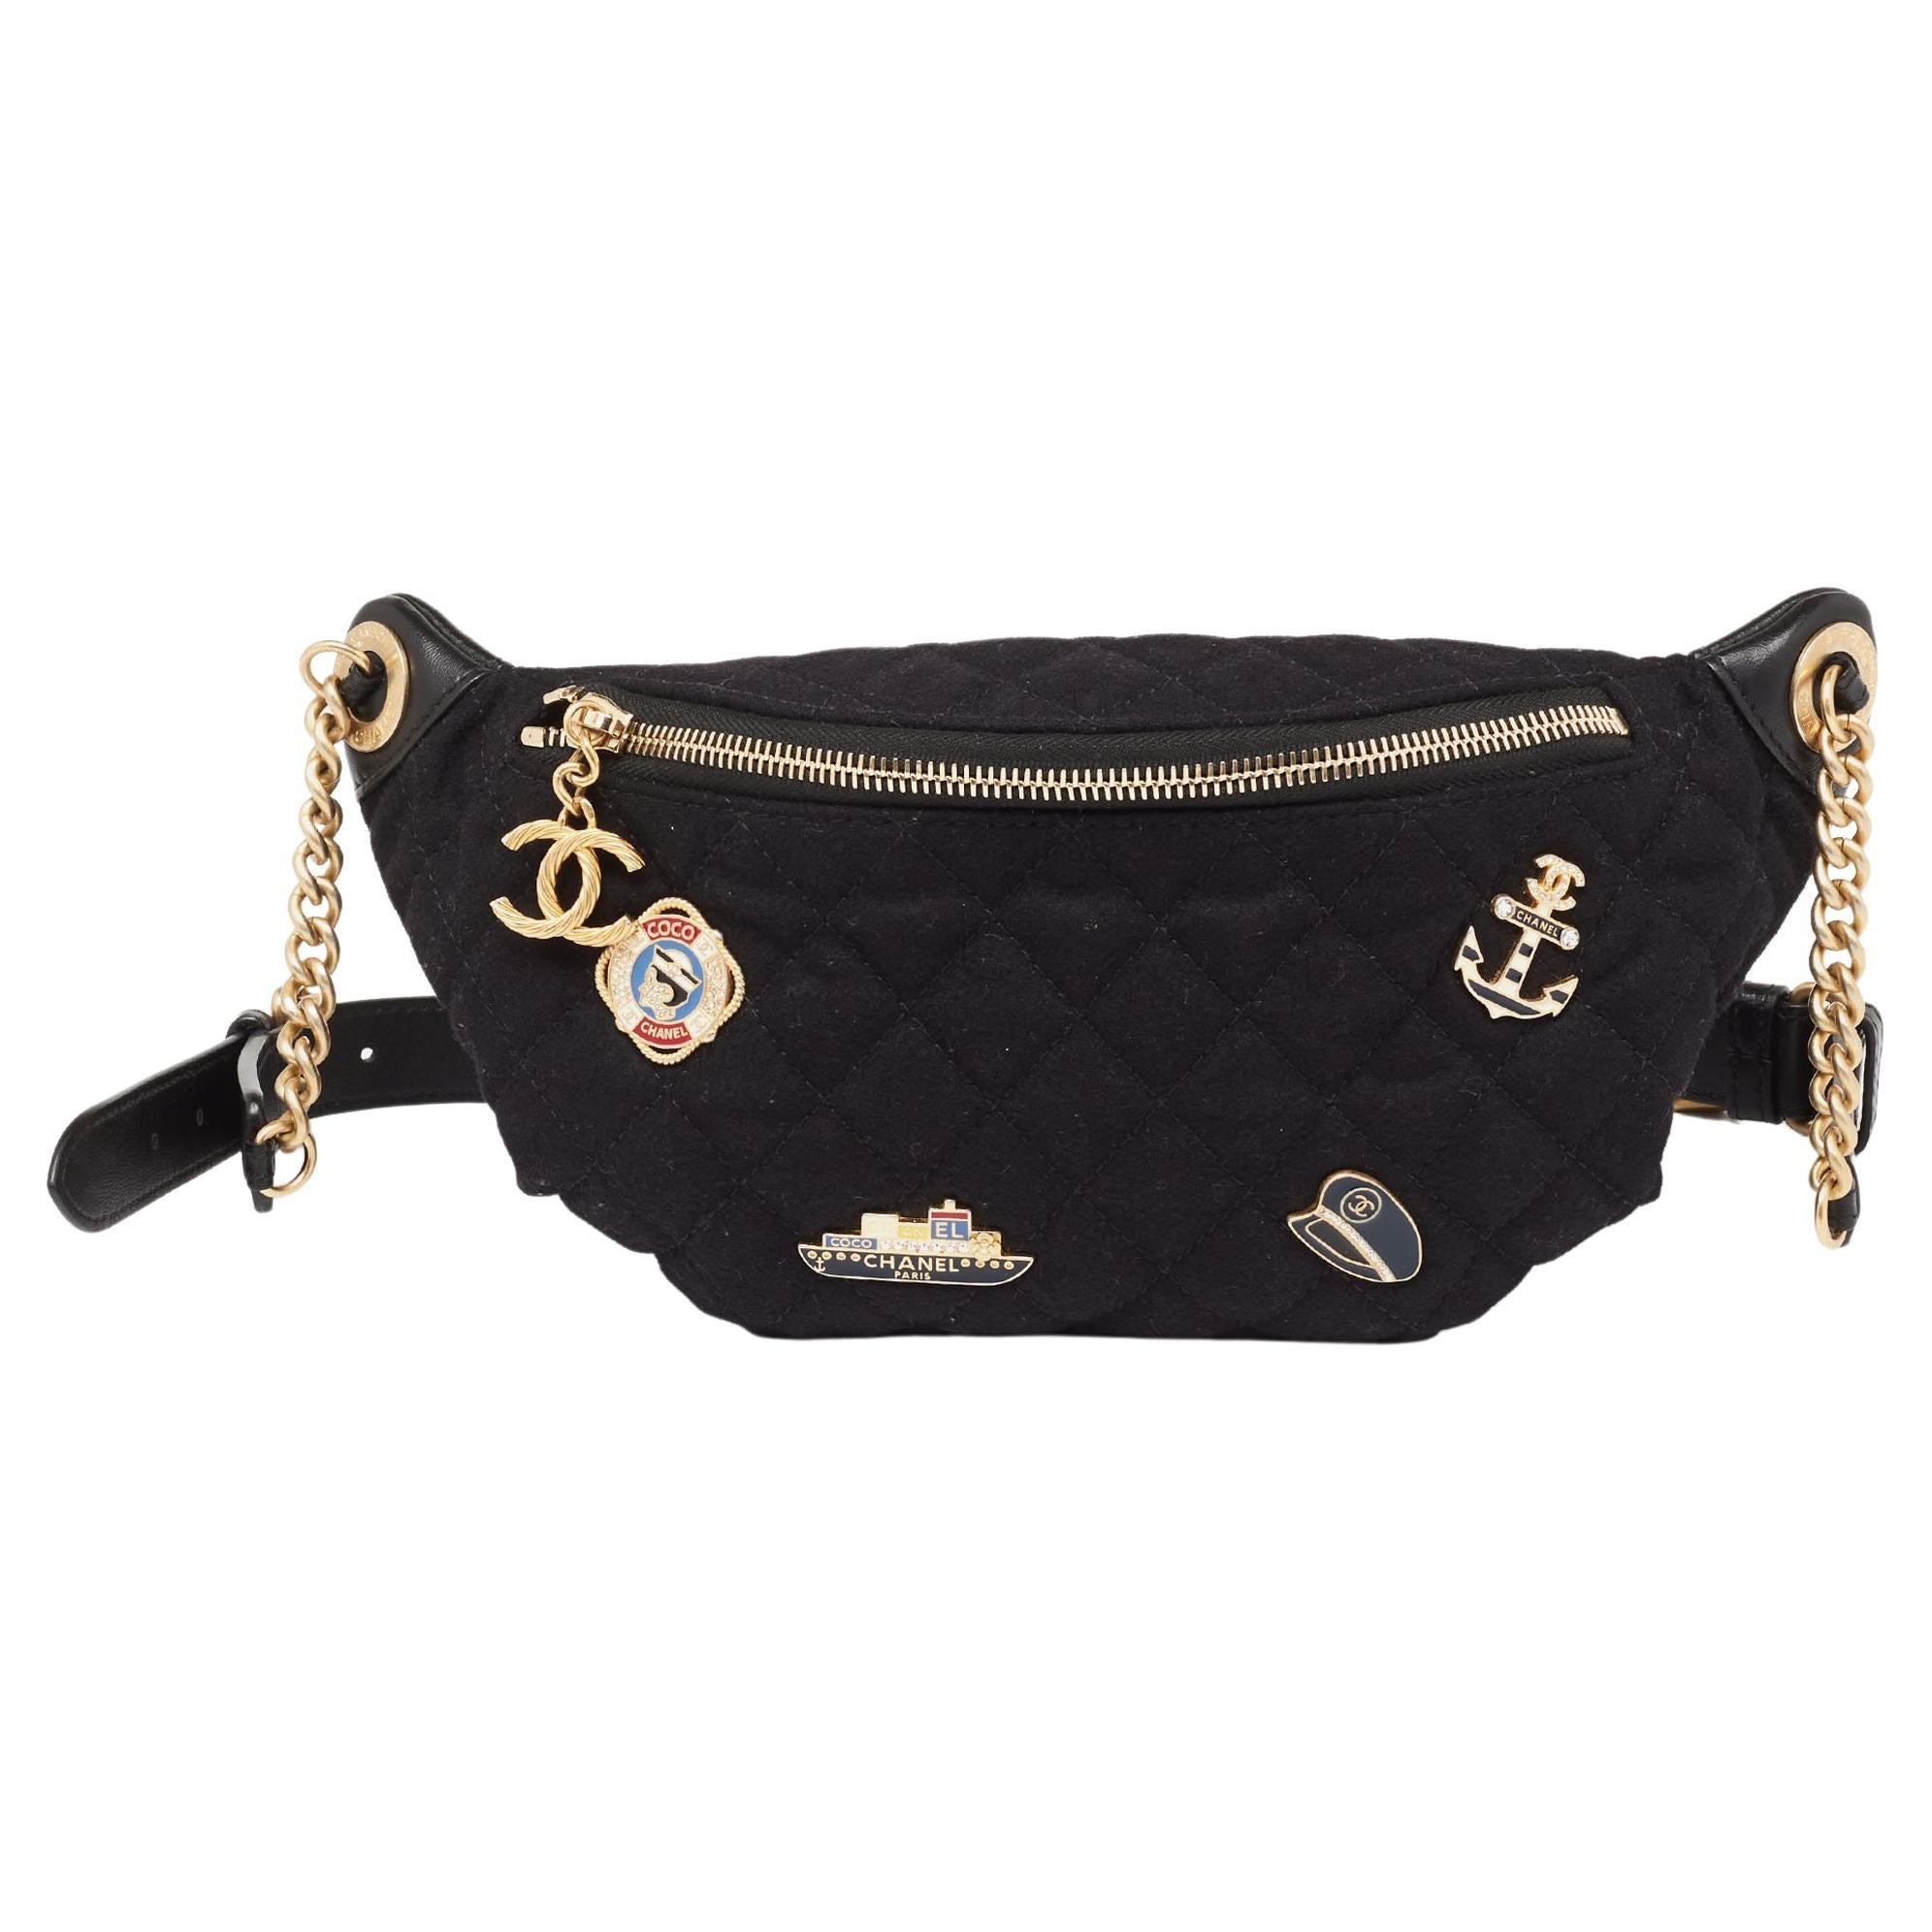 Chanel Black Quilted Fabric and Leather Paris Hamburg Charm Belt Bag